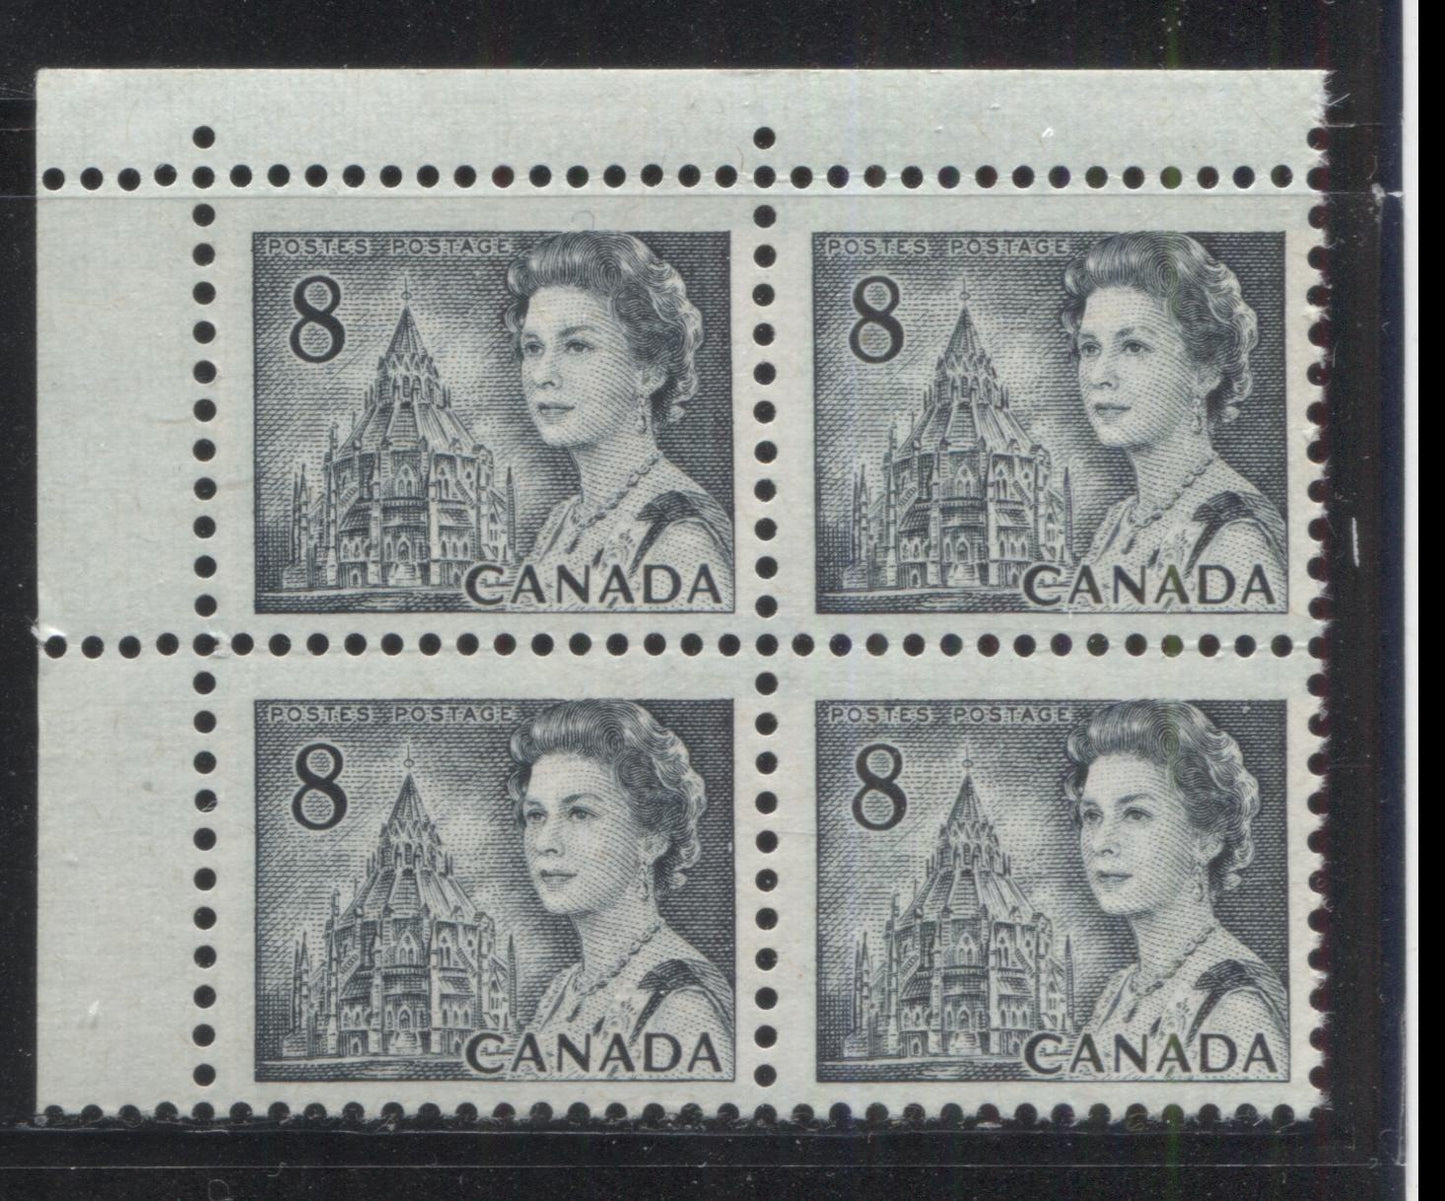 Lot 174 Canada #544iiver 8c Slate Queen Elizabeth II, 1967-1973 Centennial Issue, An Unlisted FNH UL Field Stock Block Of 4 On MF-fl Ribbed Paper With PVA Gum